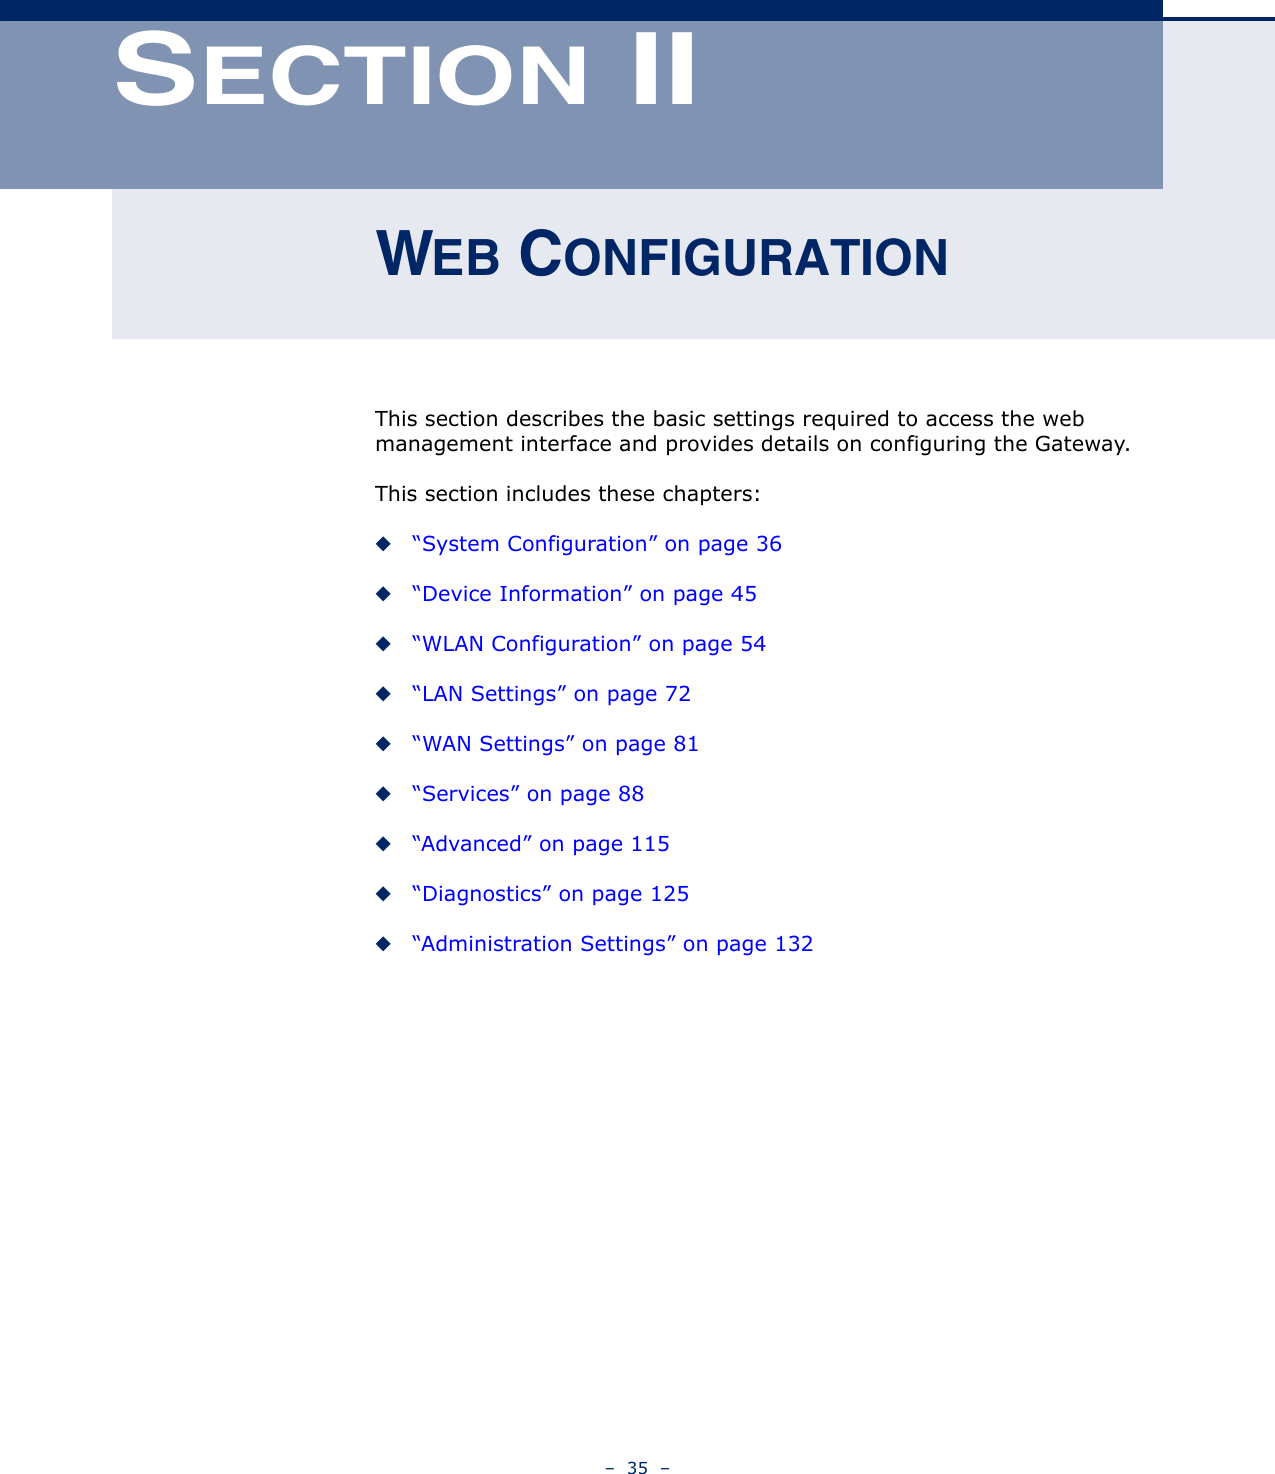 –  35  –SECTION IIWEB CONFIGURATIONThis section describes the basic settings required to access the web management interface and provides details on configuring the Gateway.This section includes these chapters:◆“System Configuration” on page 36◆“Device Information” on page 45◆“WLAN Configuration” on page 54◆“LAN Settings” on page 72◆“WAN Settings” on page 81◆“Services” on page 88◆“Advanced” on page 115◆“Diagnostics” on page 125◆“Administration Settings” on page 132